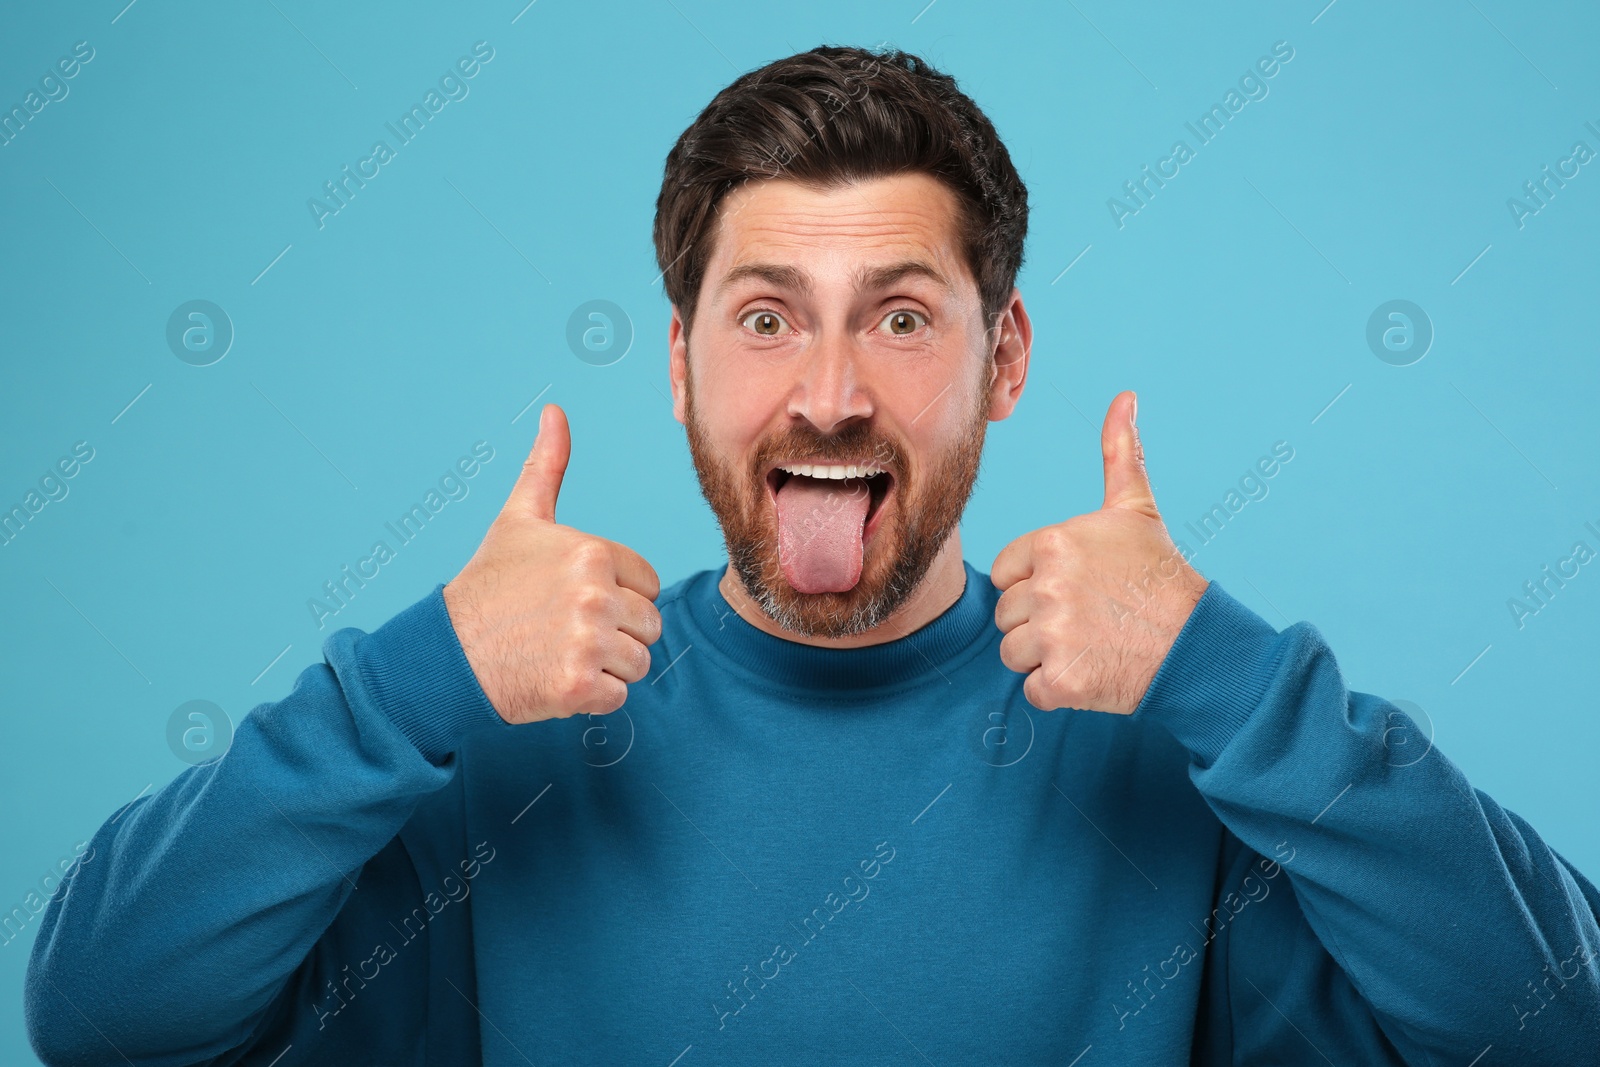 Photo of Man showing his tongue and thumbs up on light blue background